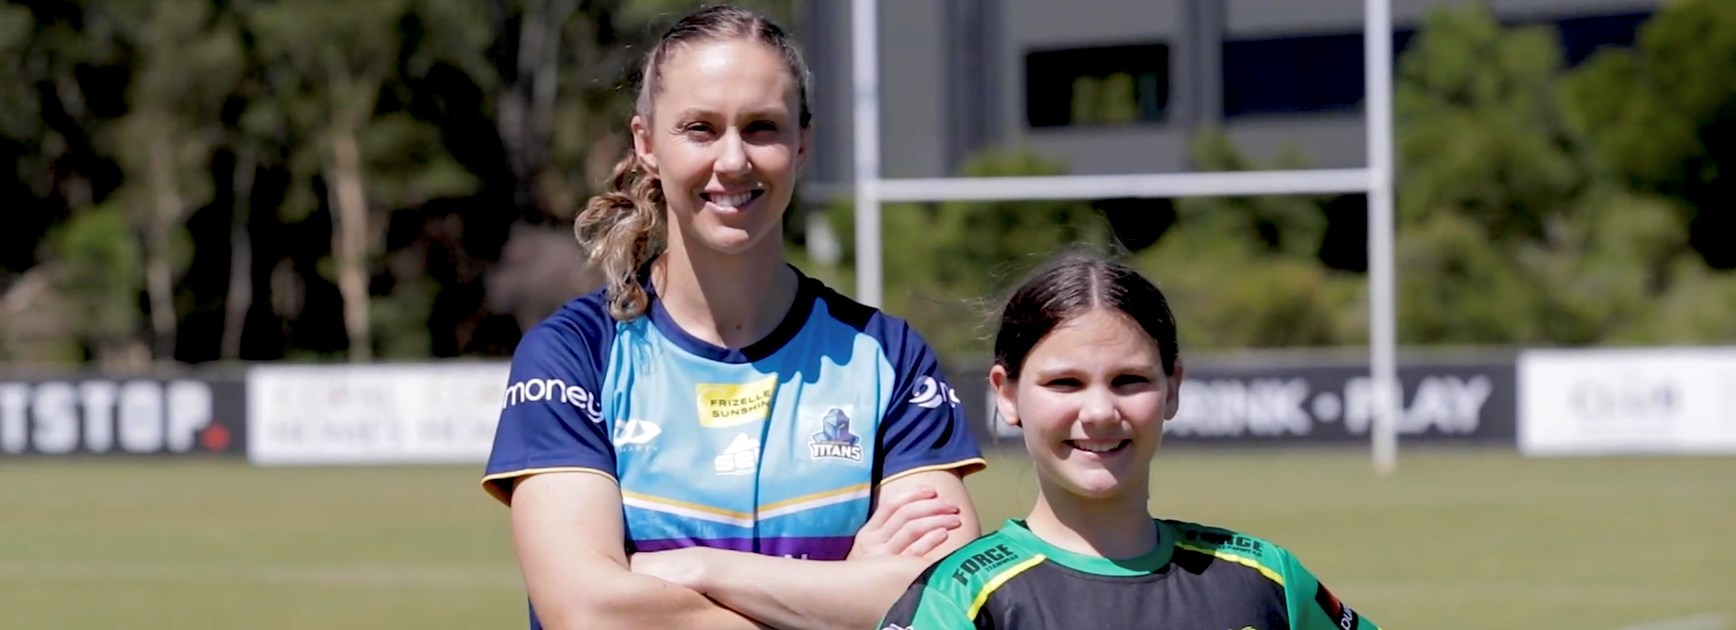 Karina Brown with Helensvale Hornet player, Jenna. Photo: Gold Coast Titans